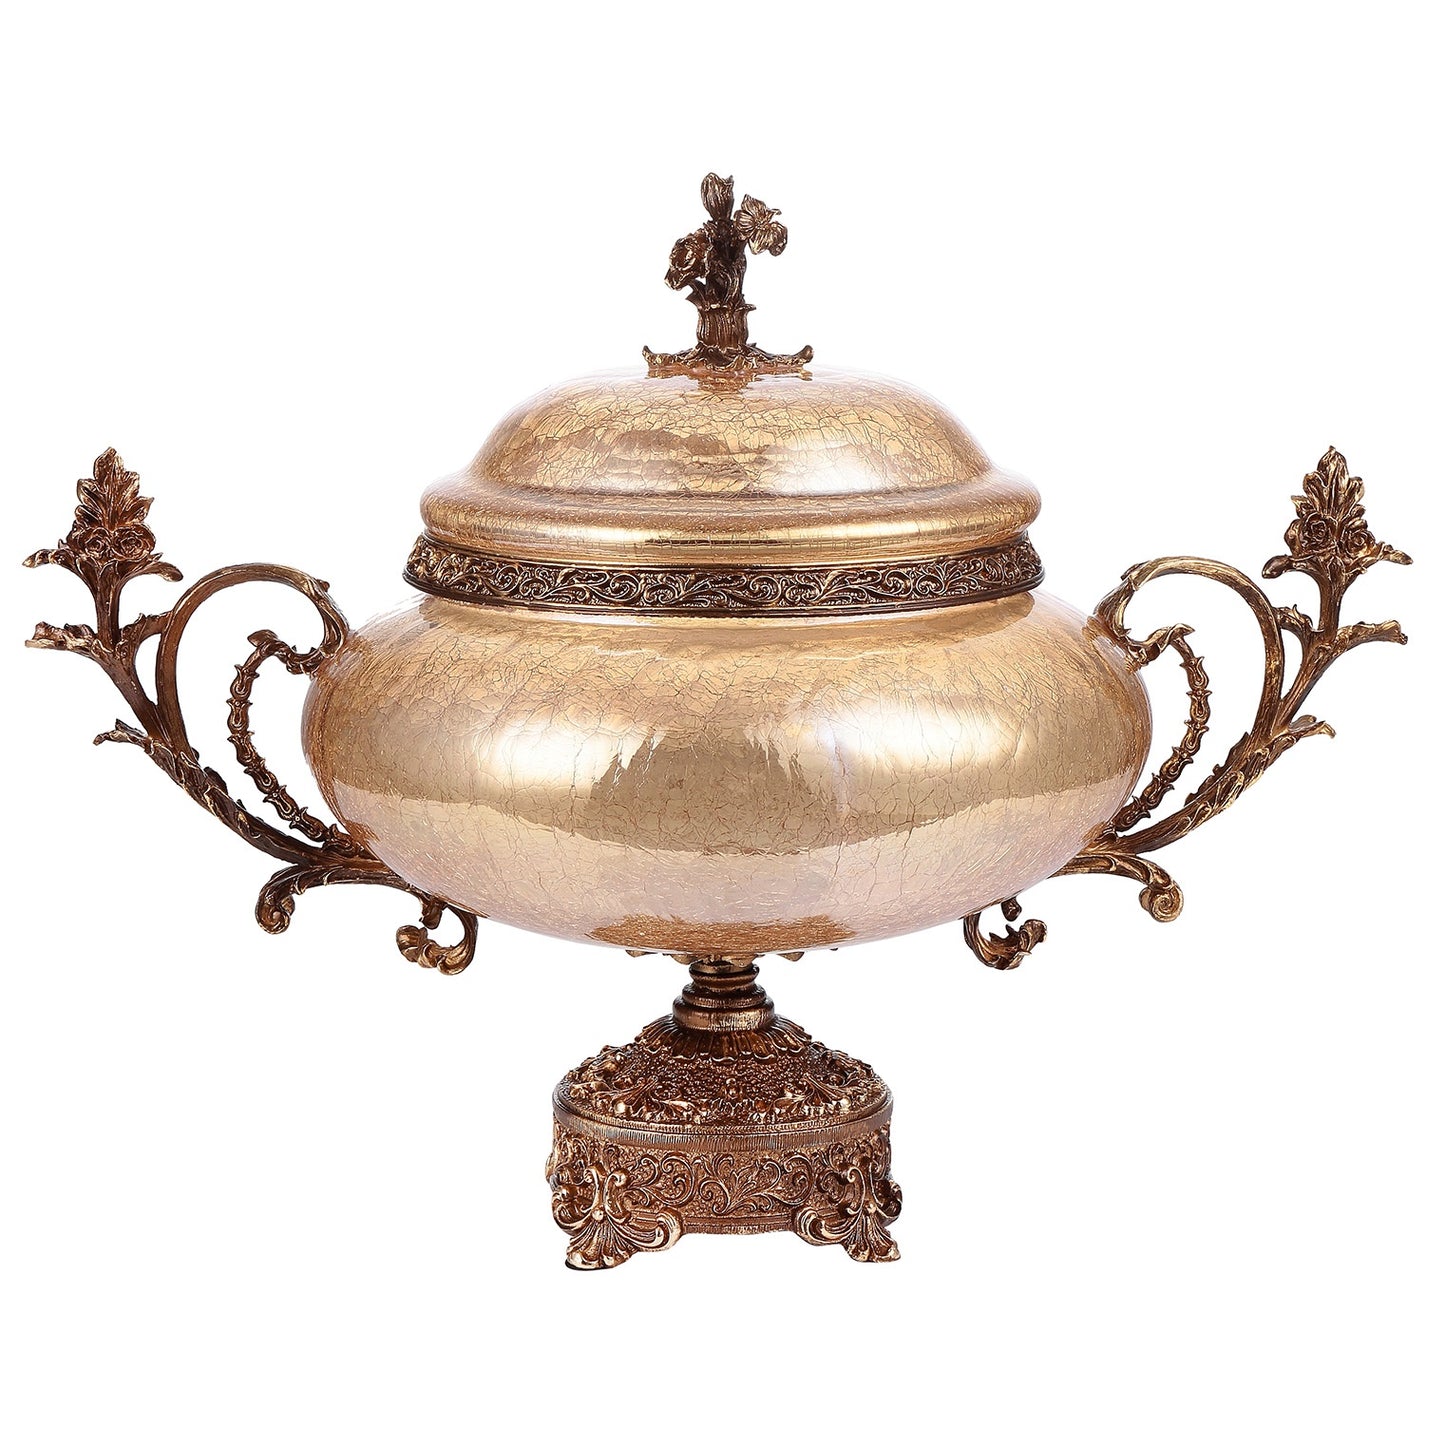 Urn in Bronze & Golden Pearl Crackle Finish AC6009 European Traditional Victorian